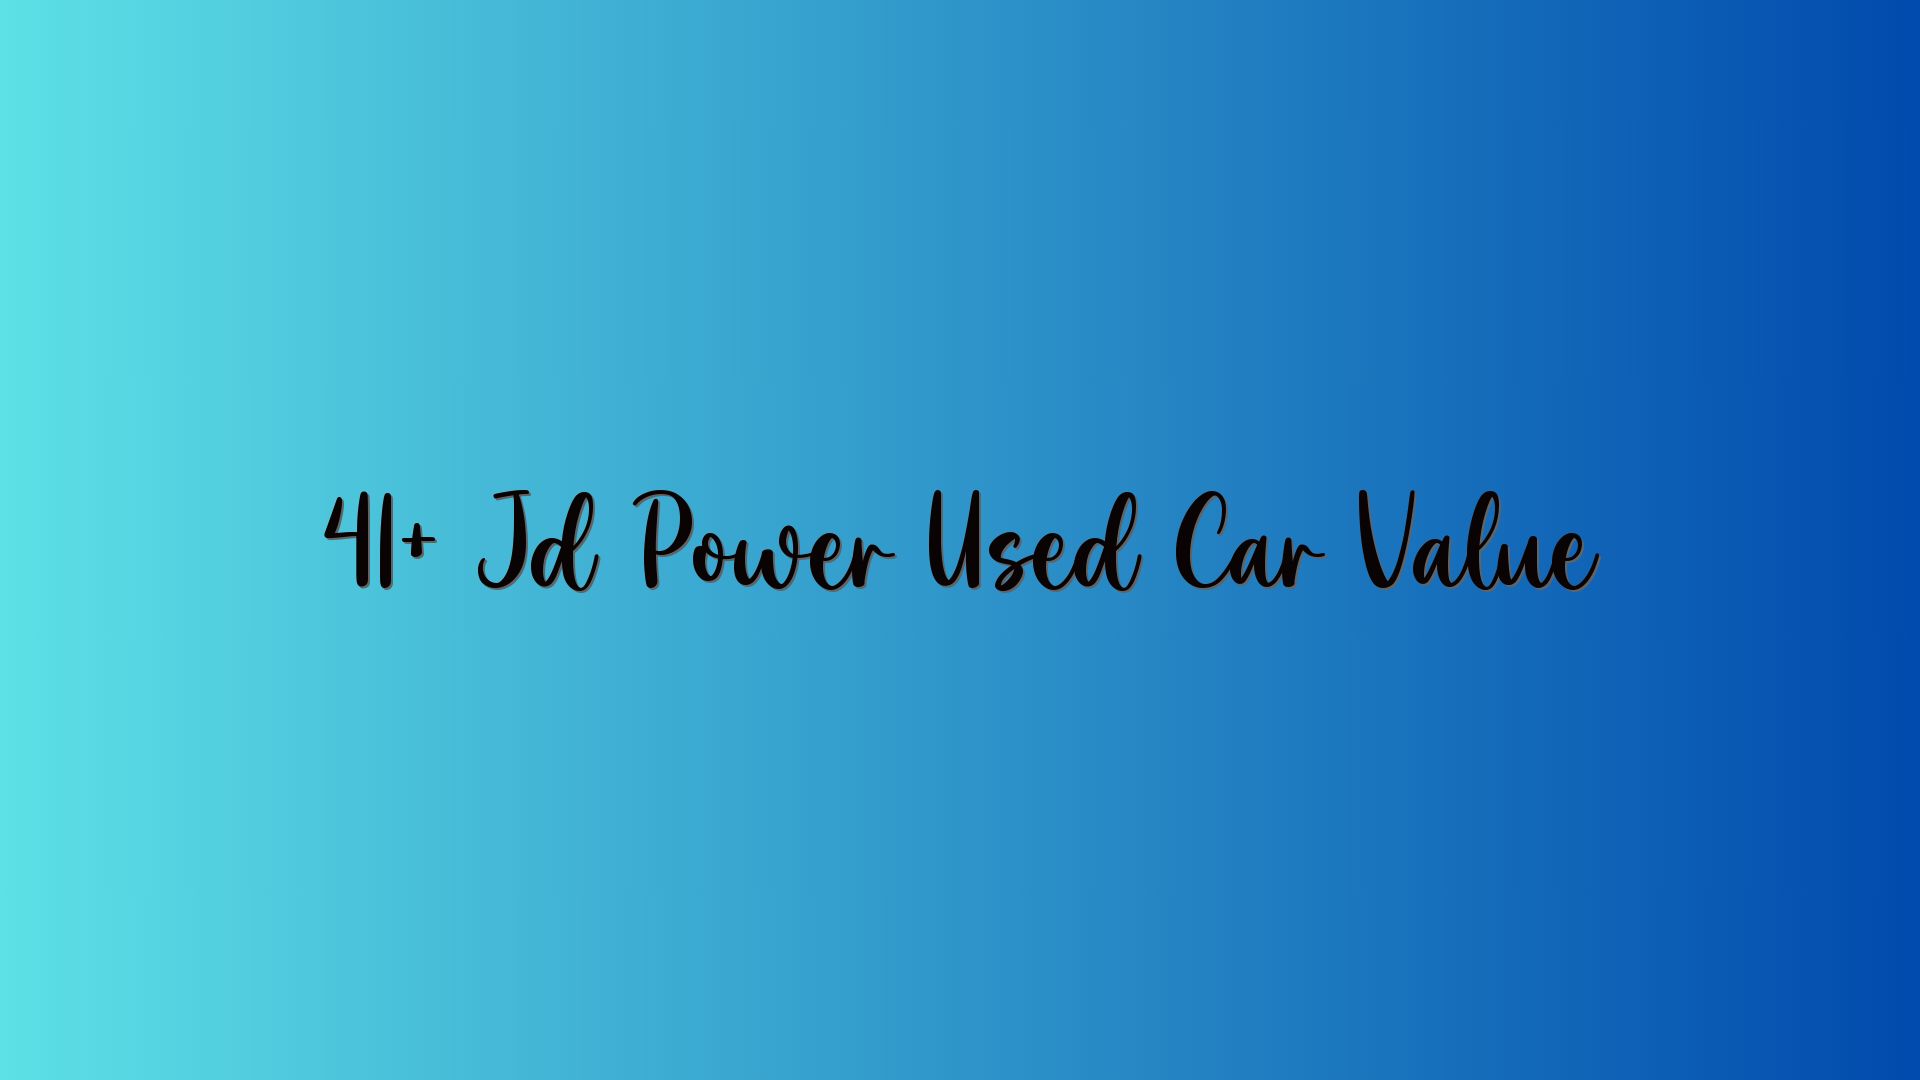 41+ Jd Power Used Car Value